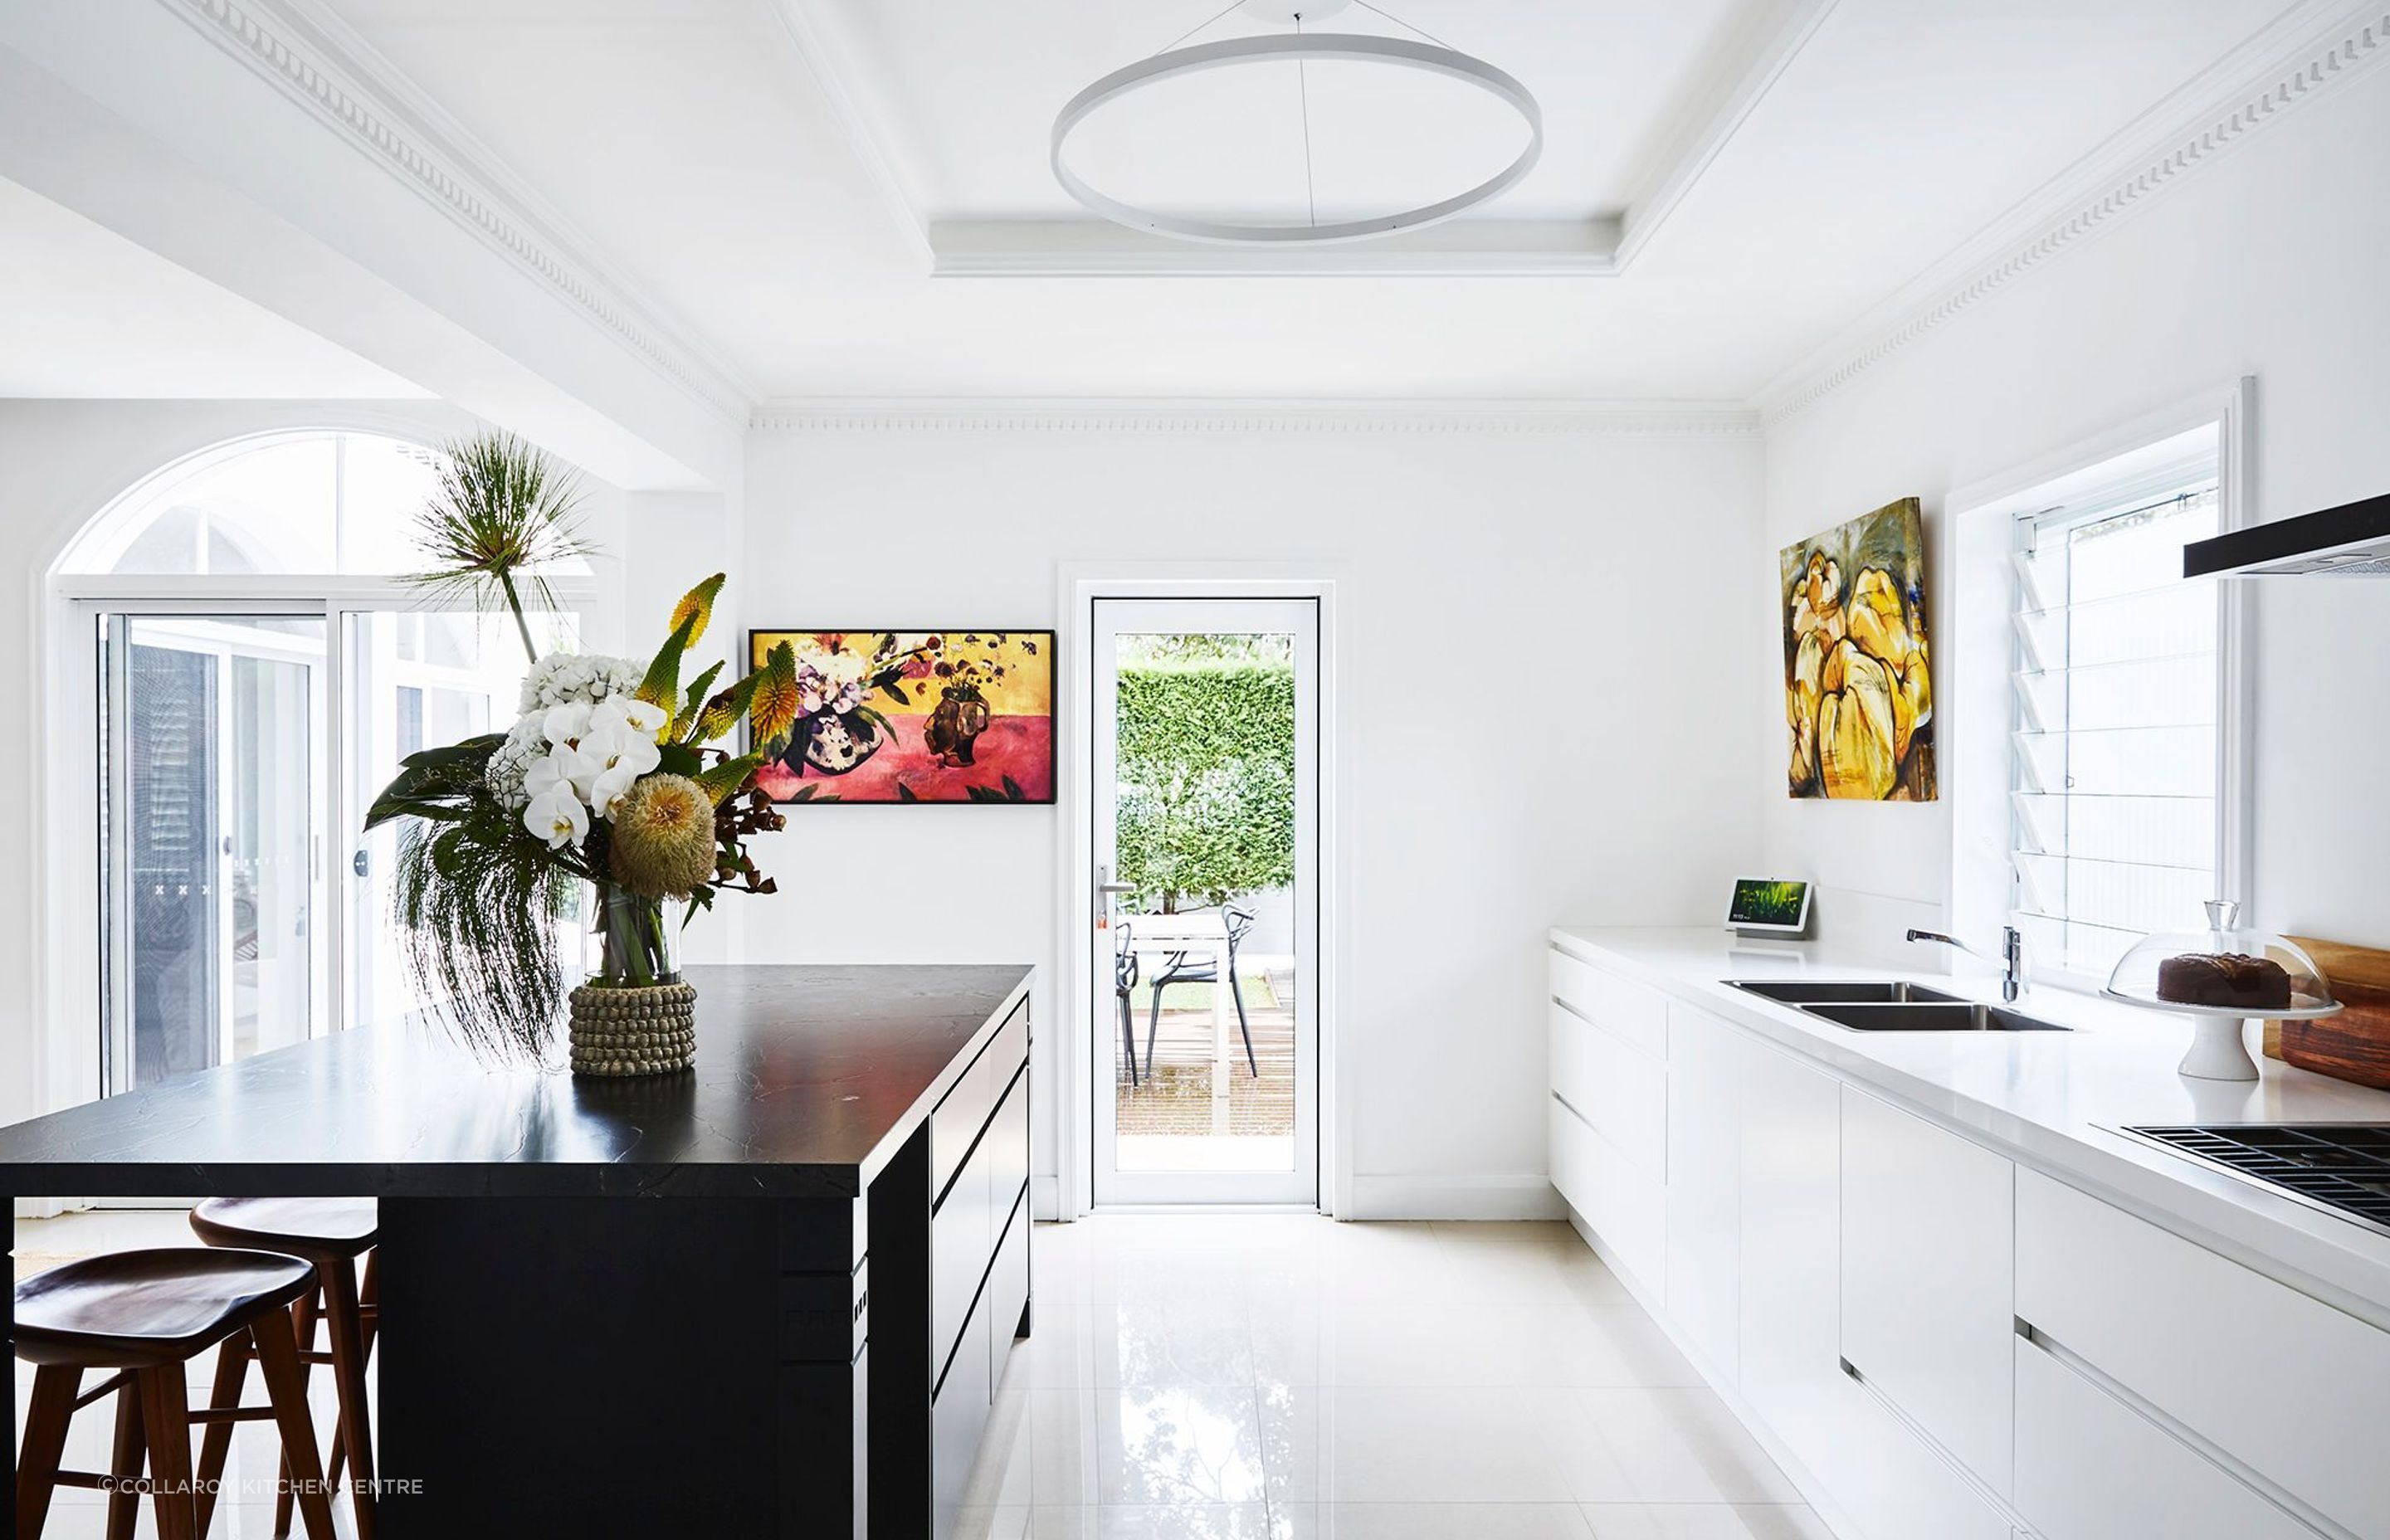 A few works of art can make a big difference in a kitchen - Photography: Amanda Prior Photography